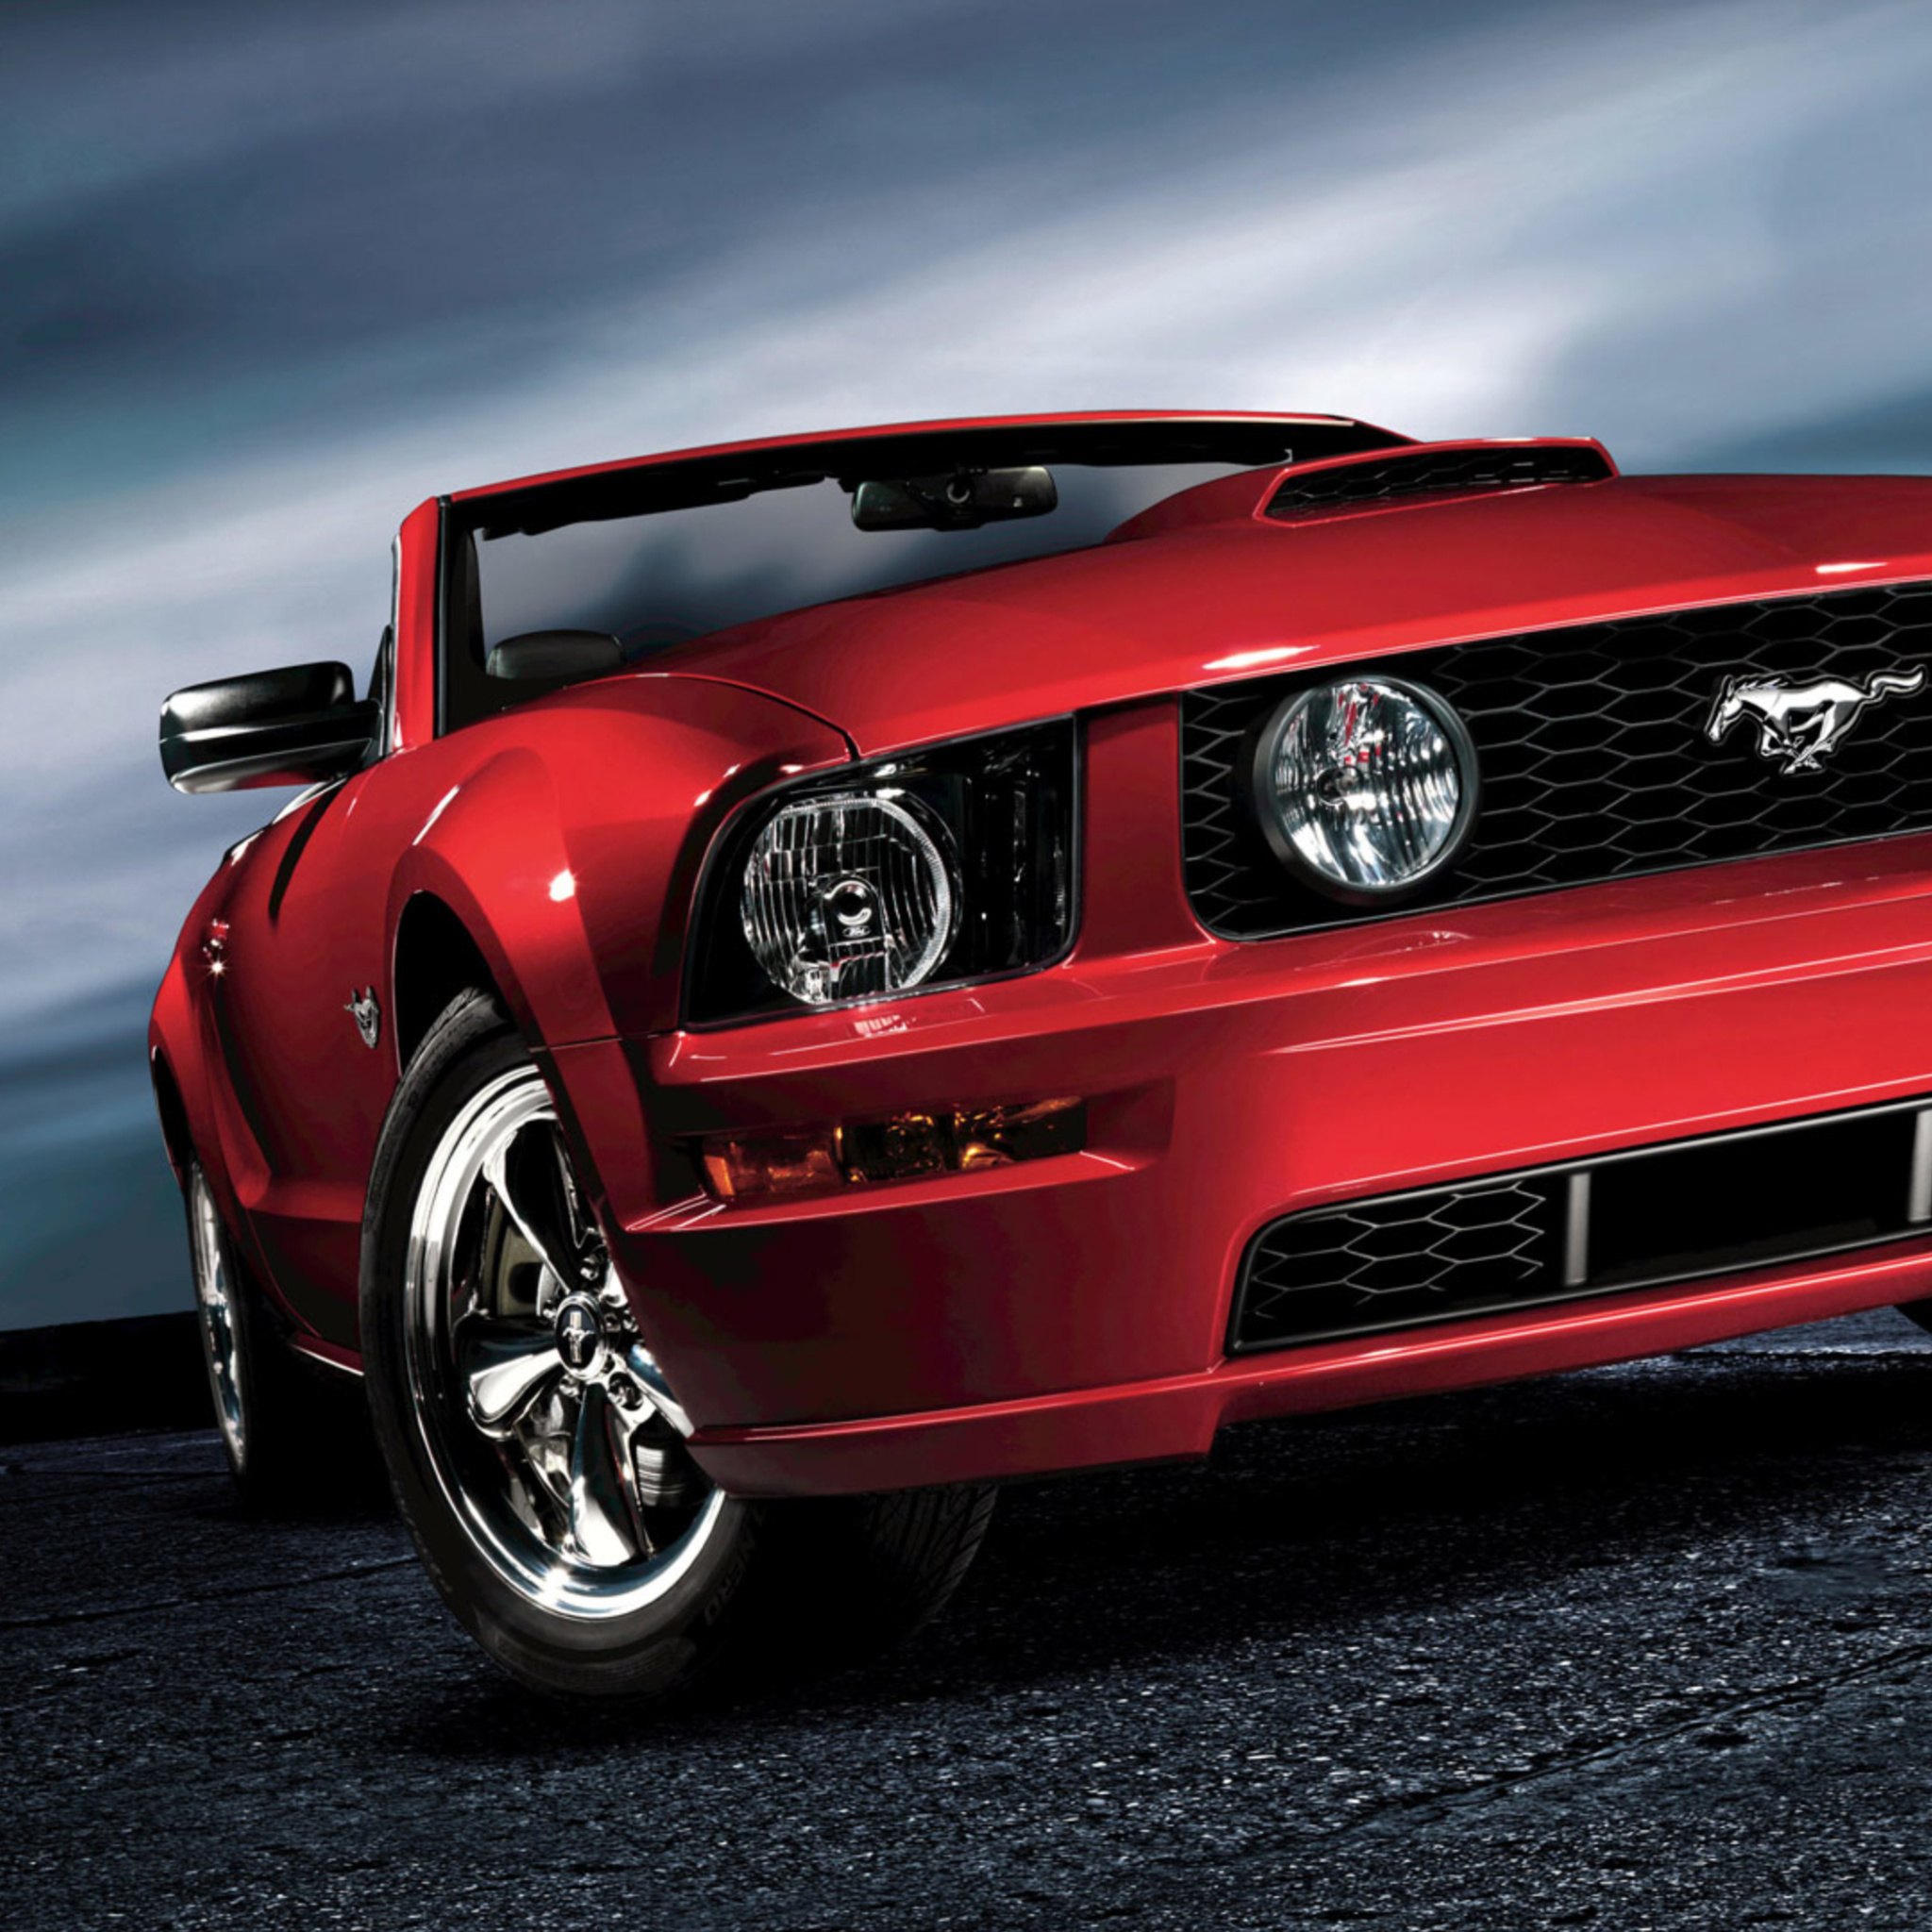 Das Ford Mustang Shelby GT500 Wallpaper 2048x2048